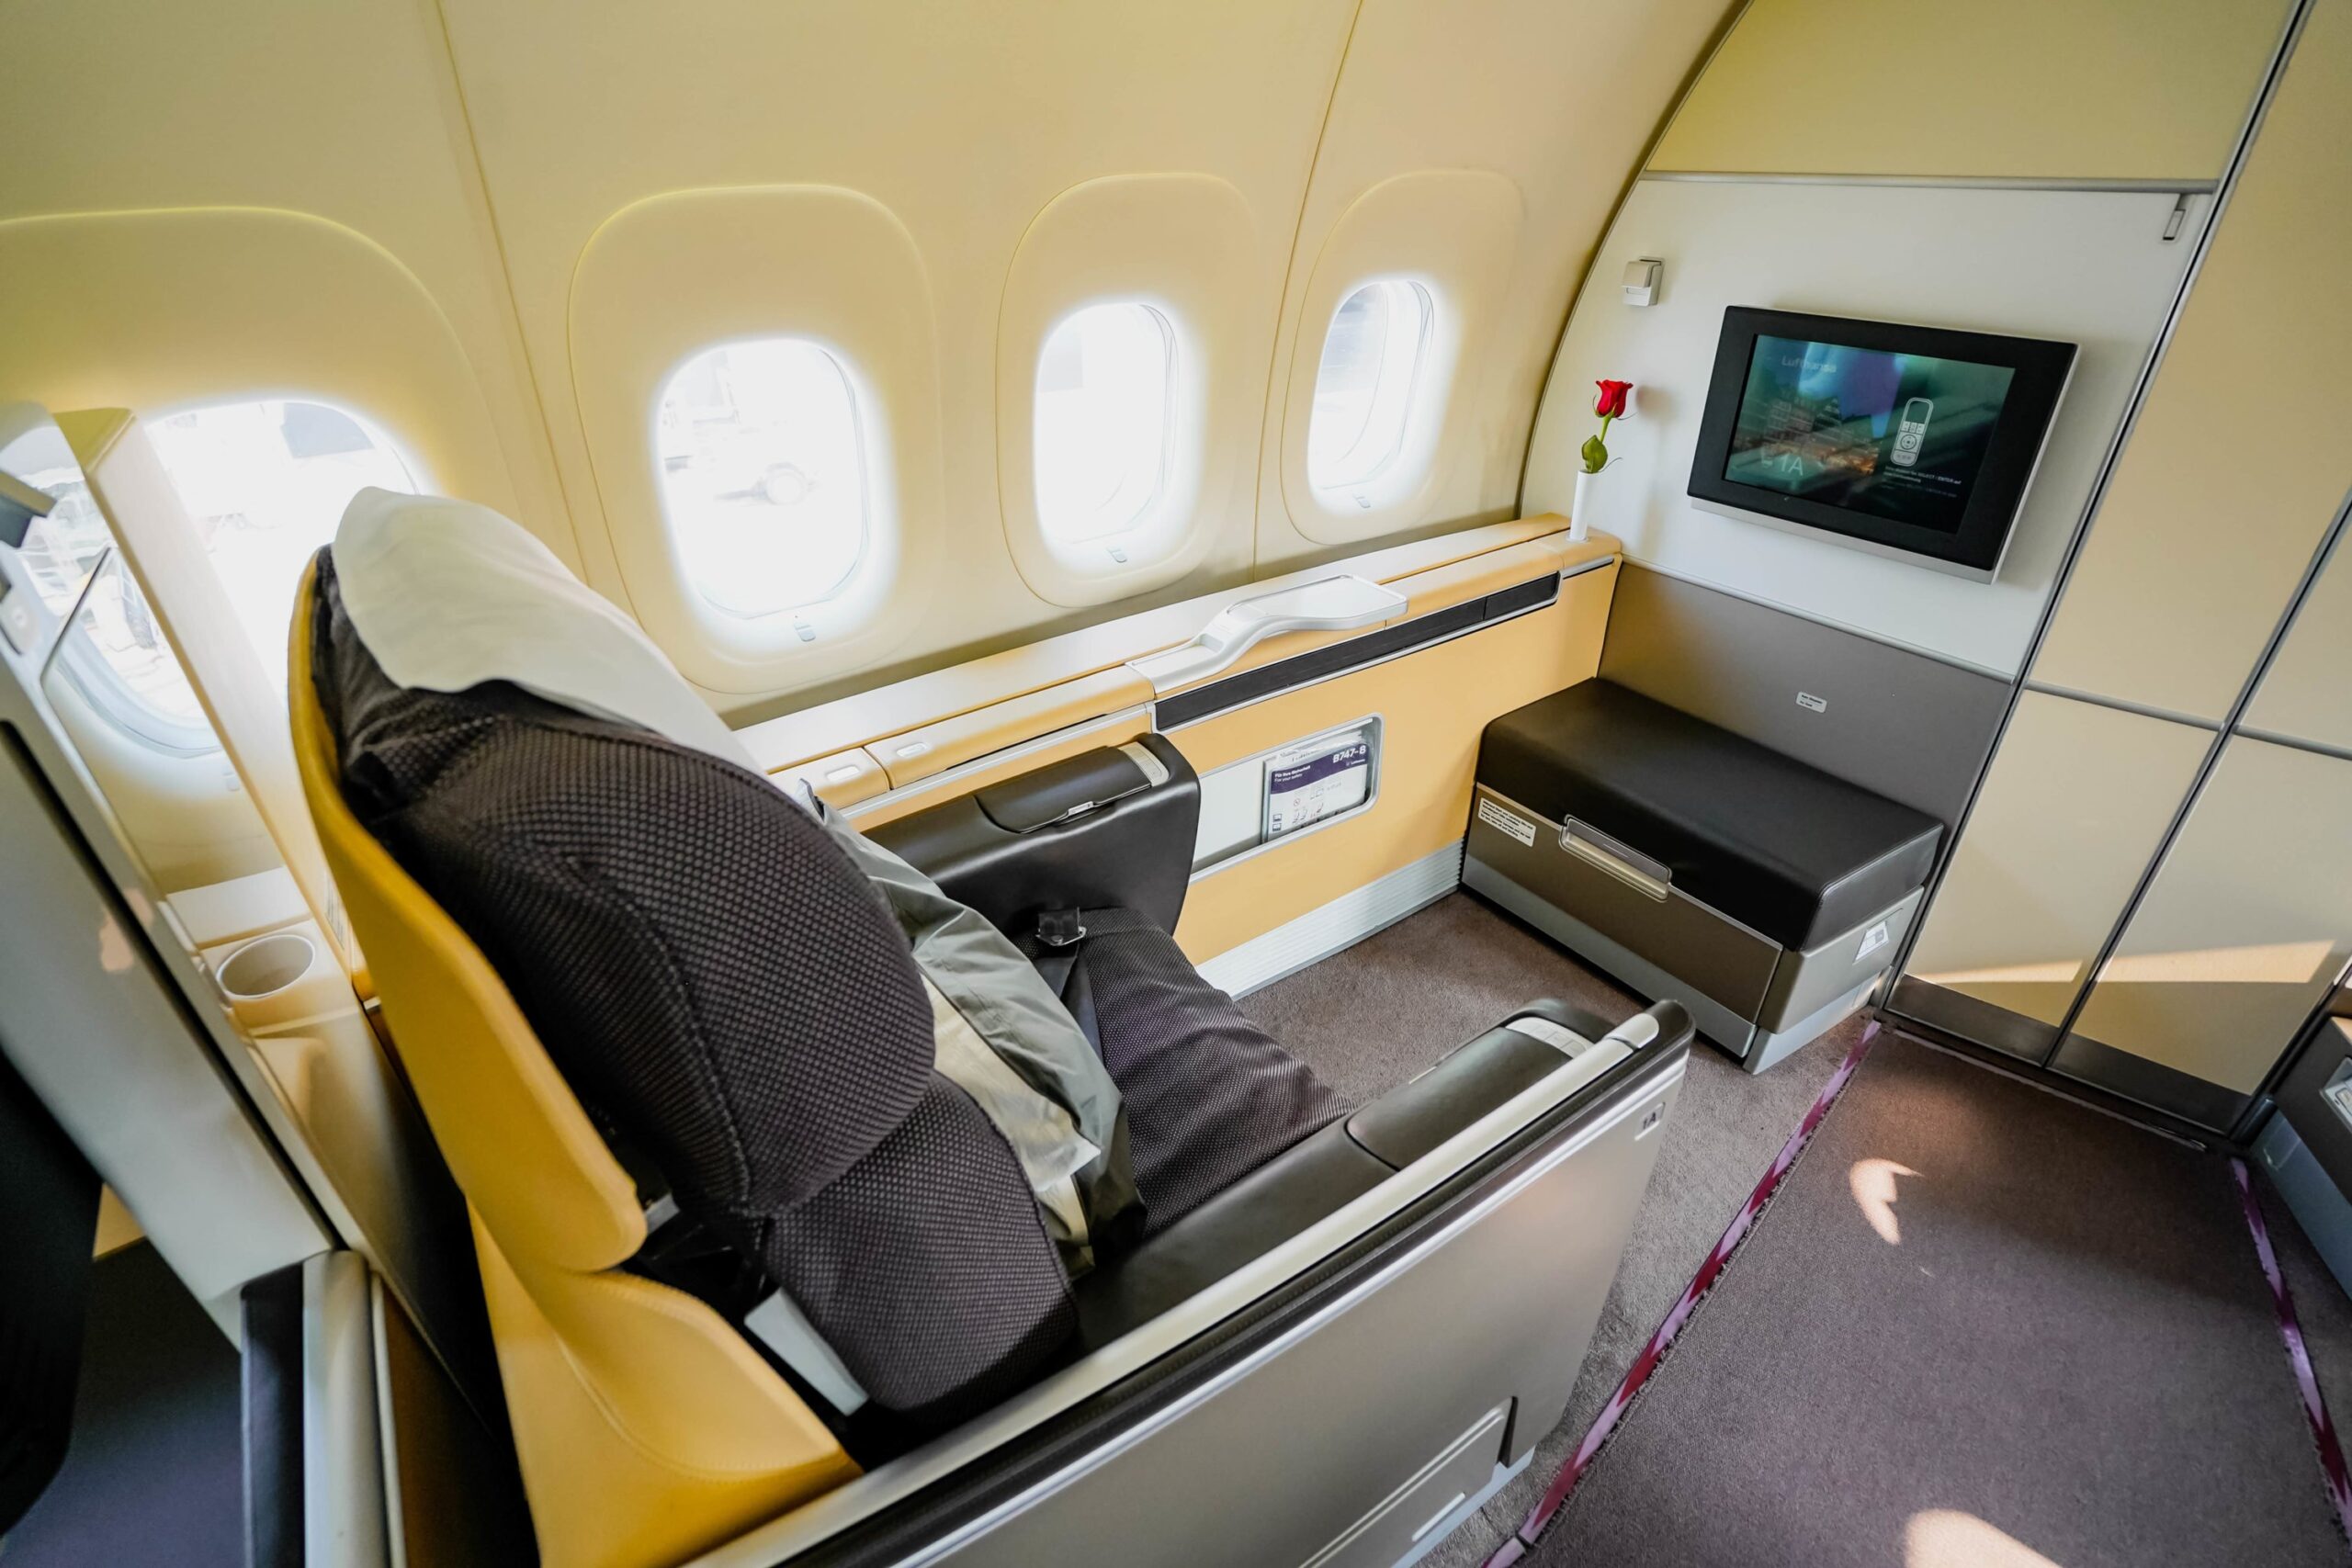 This Lufthansa First Class Seat Is Closer To The Front Than The Pilot’s